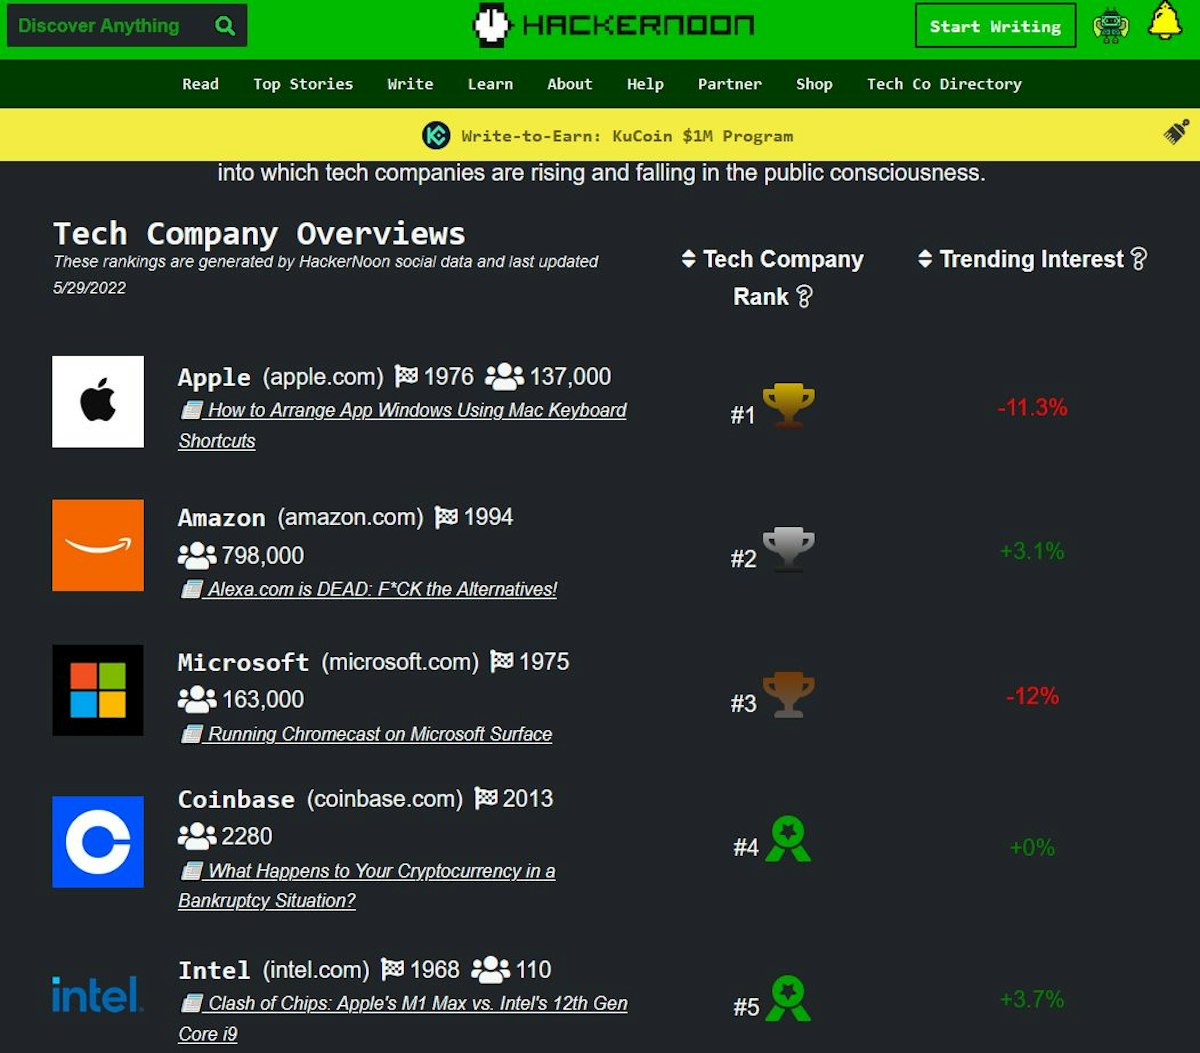 featured image - Interest in Microsoft Wanes 12% While Apple Remains Trendy AF